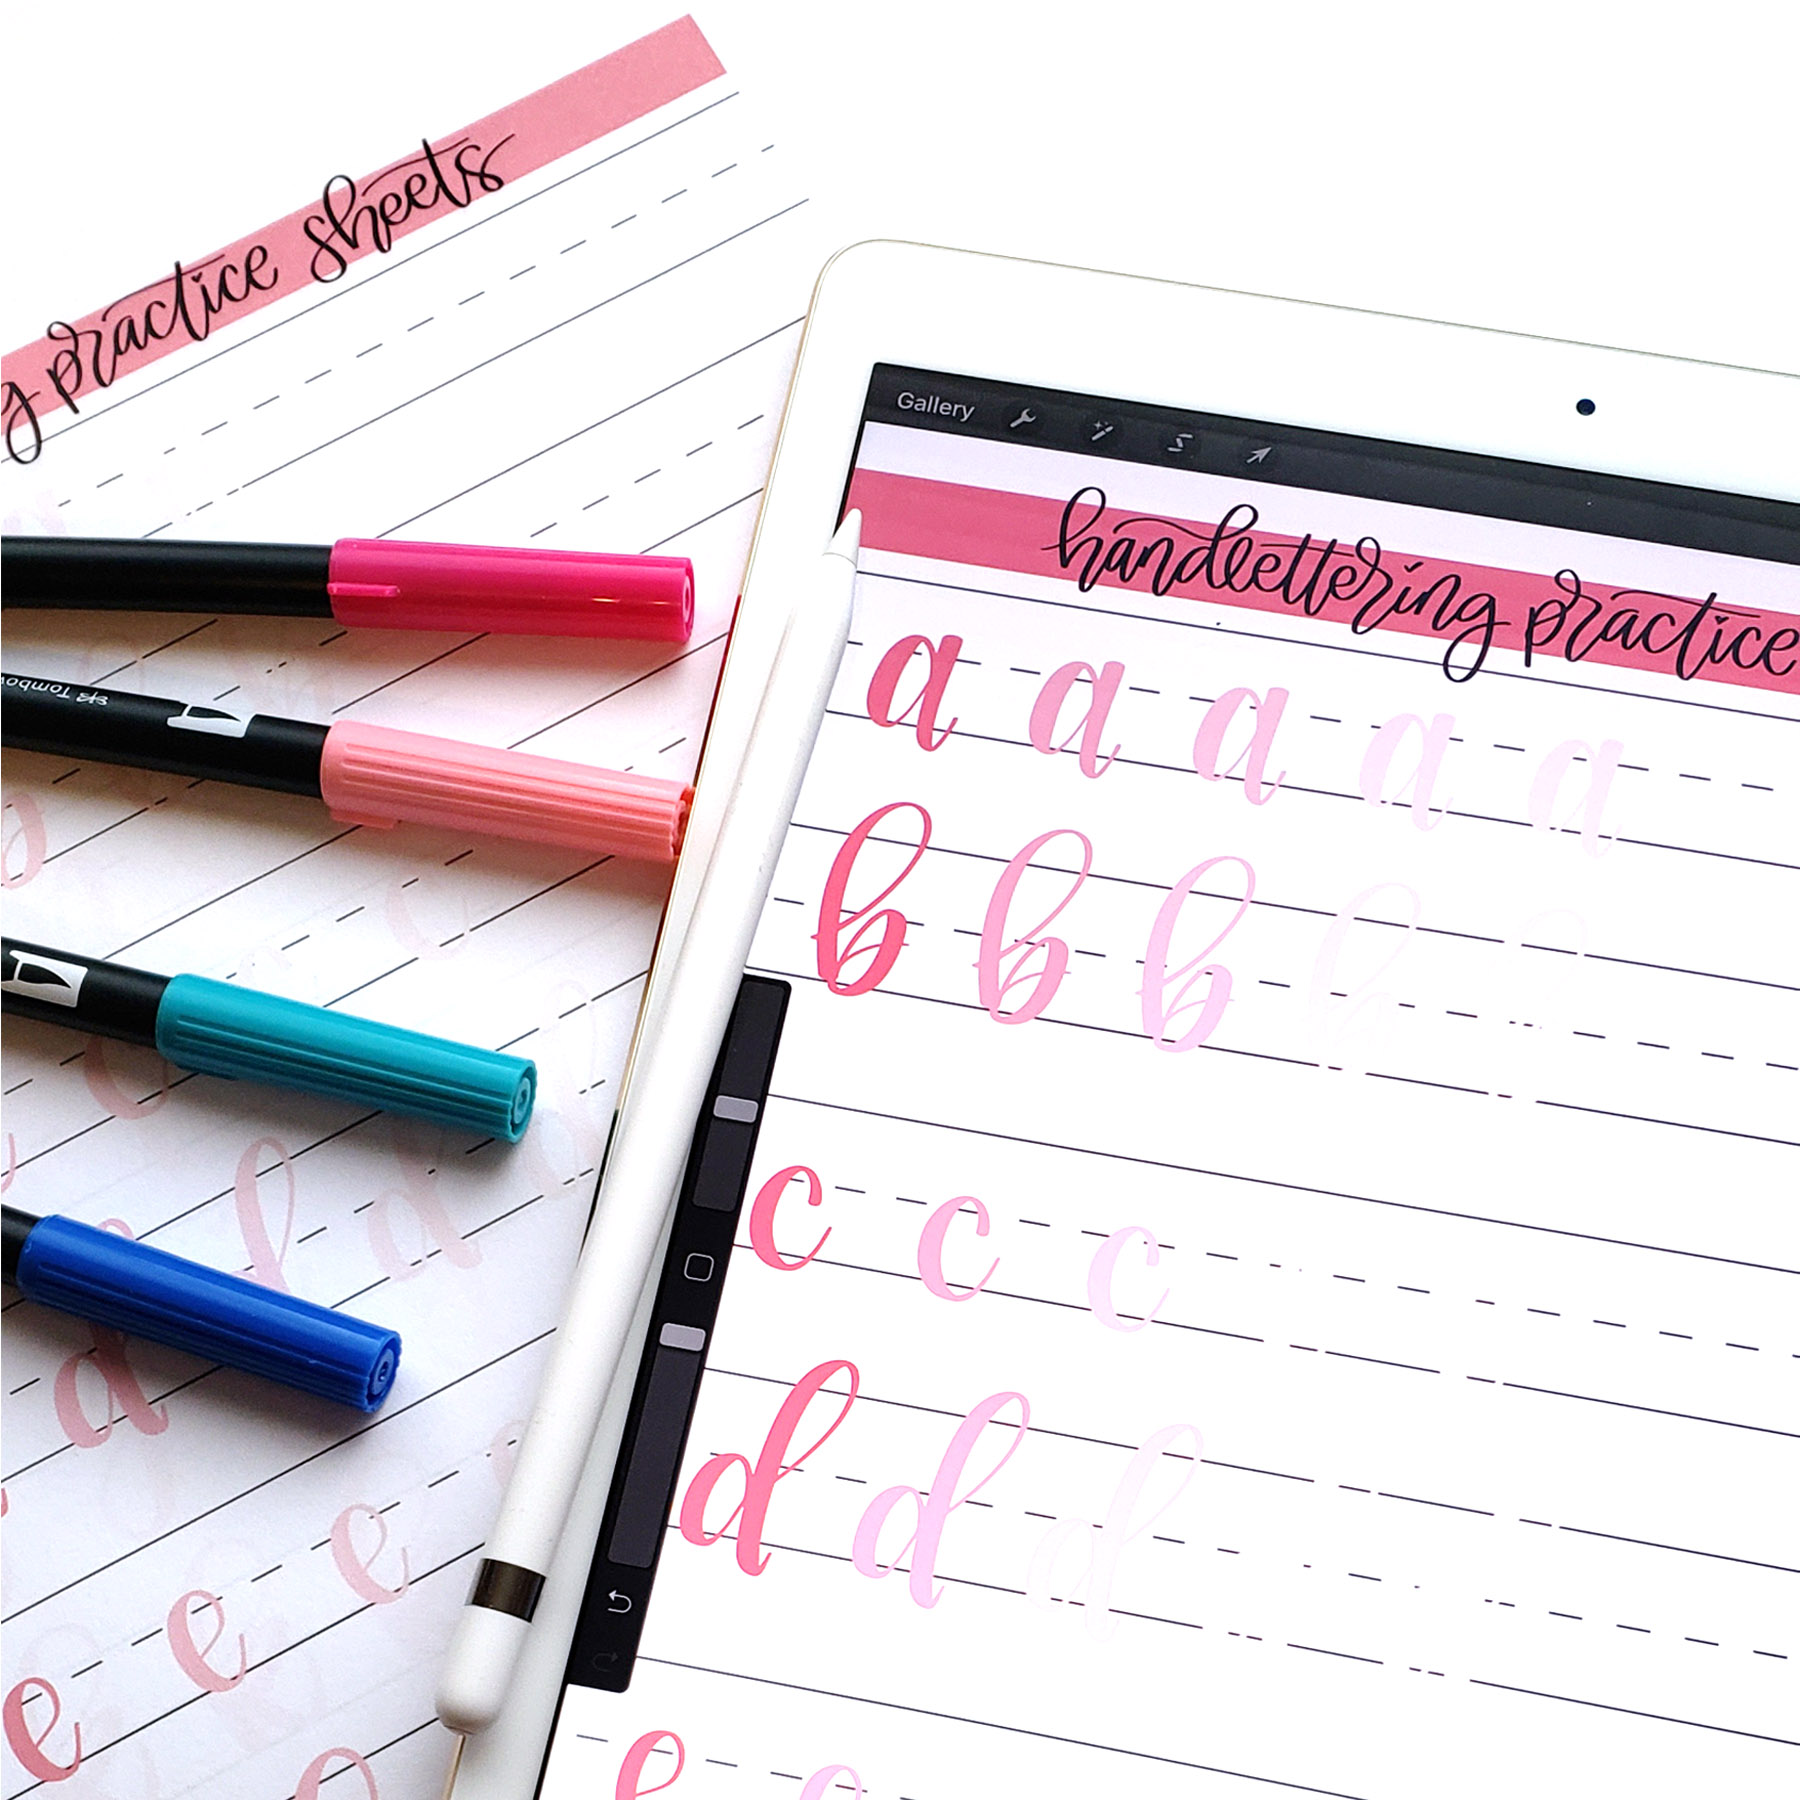 Learn to CreateBrush Lettering with a Simple Sharpie Marker! • Shawna  Clingerman